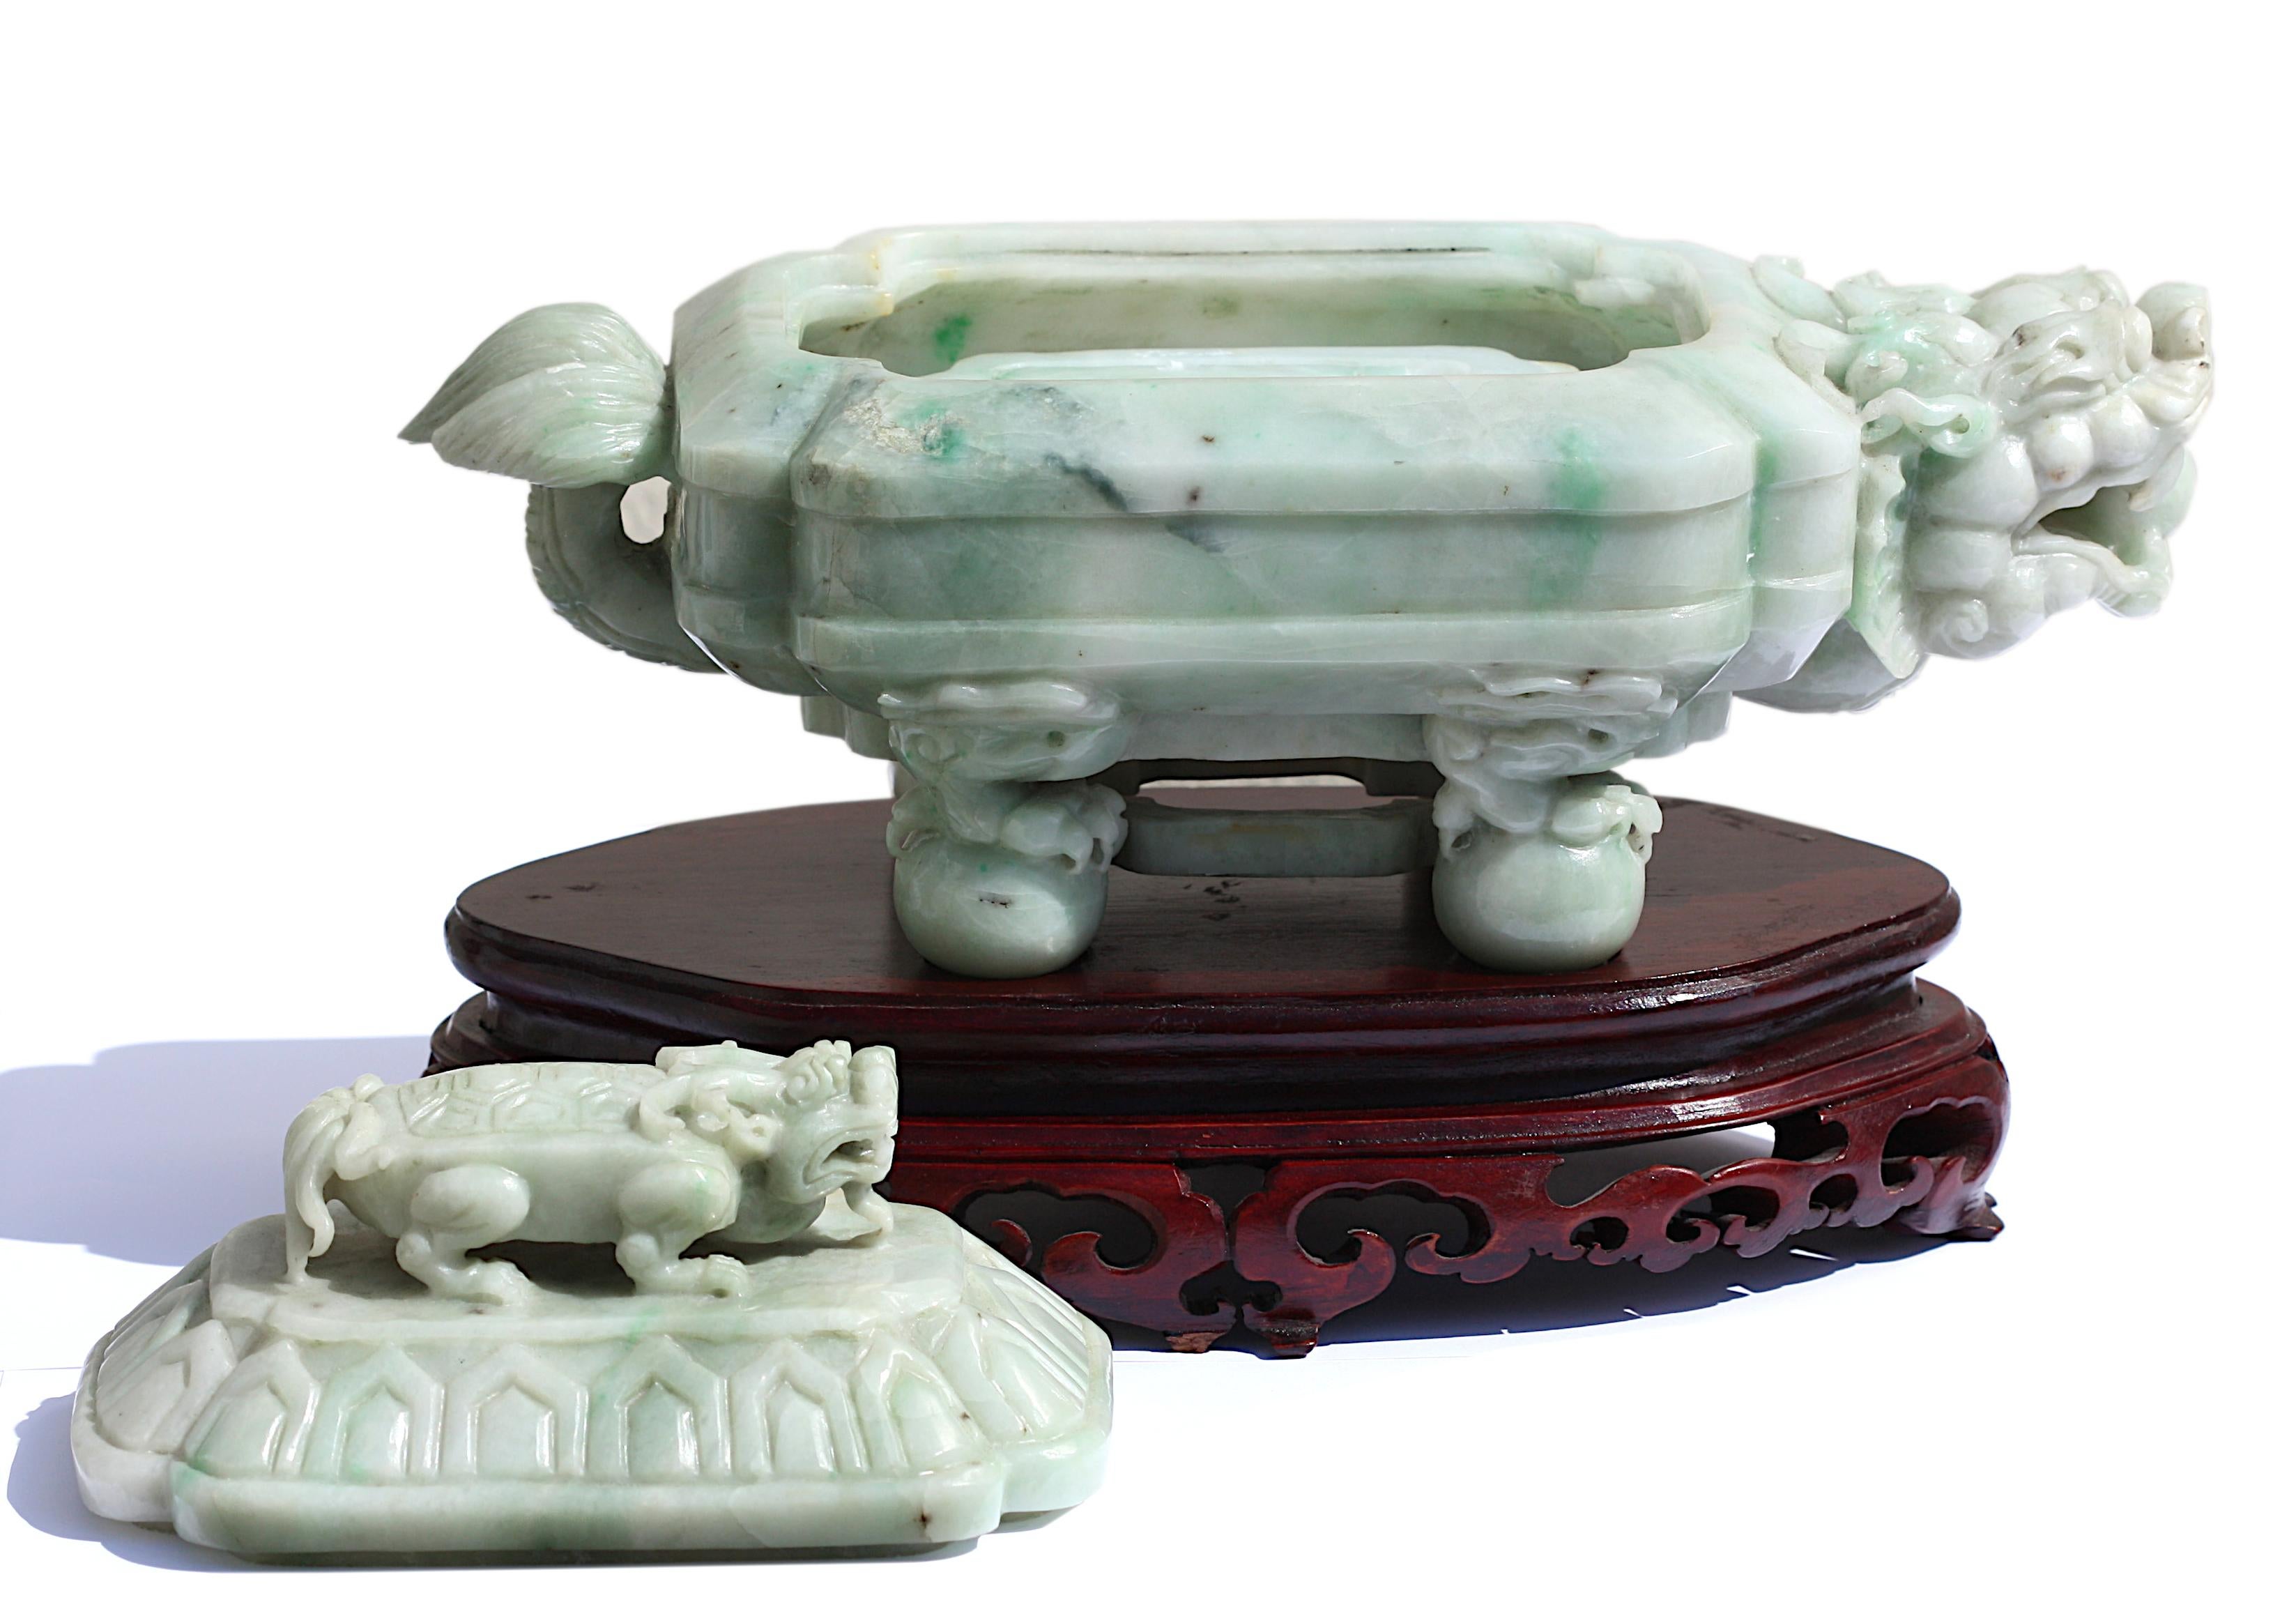 A Chinese Carved Jade Box and Cover, carved in the form of a horned mythical tortoise standing on four balls, the cover with a small tortoise and opening to reveal an ink-stone, the softly polished stone is of a pale lavendar-white color.
8 in. (20